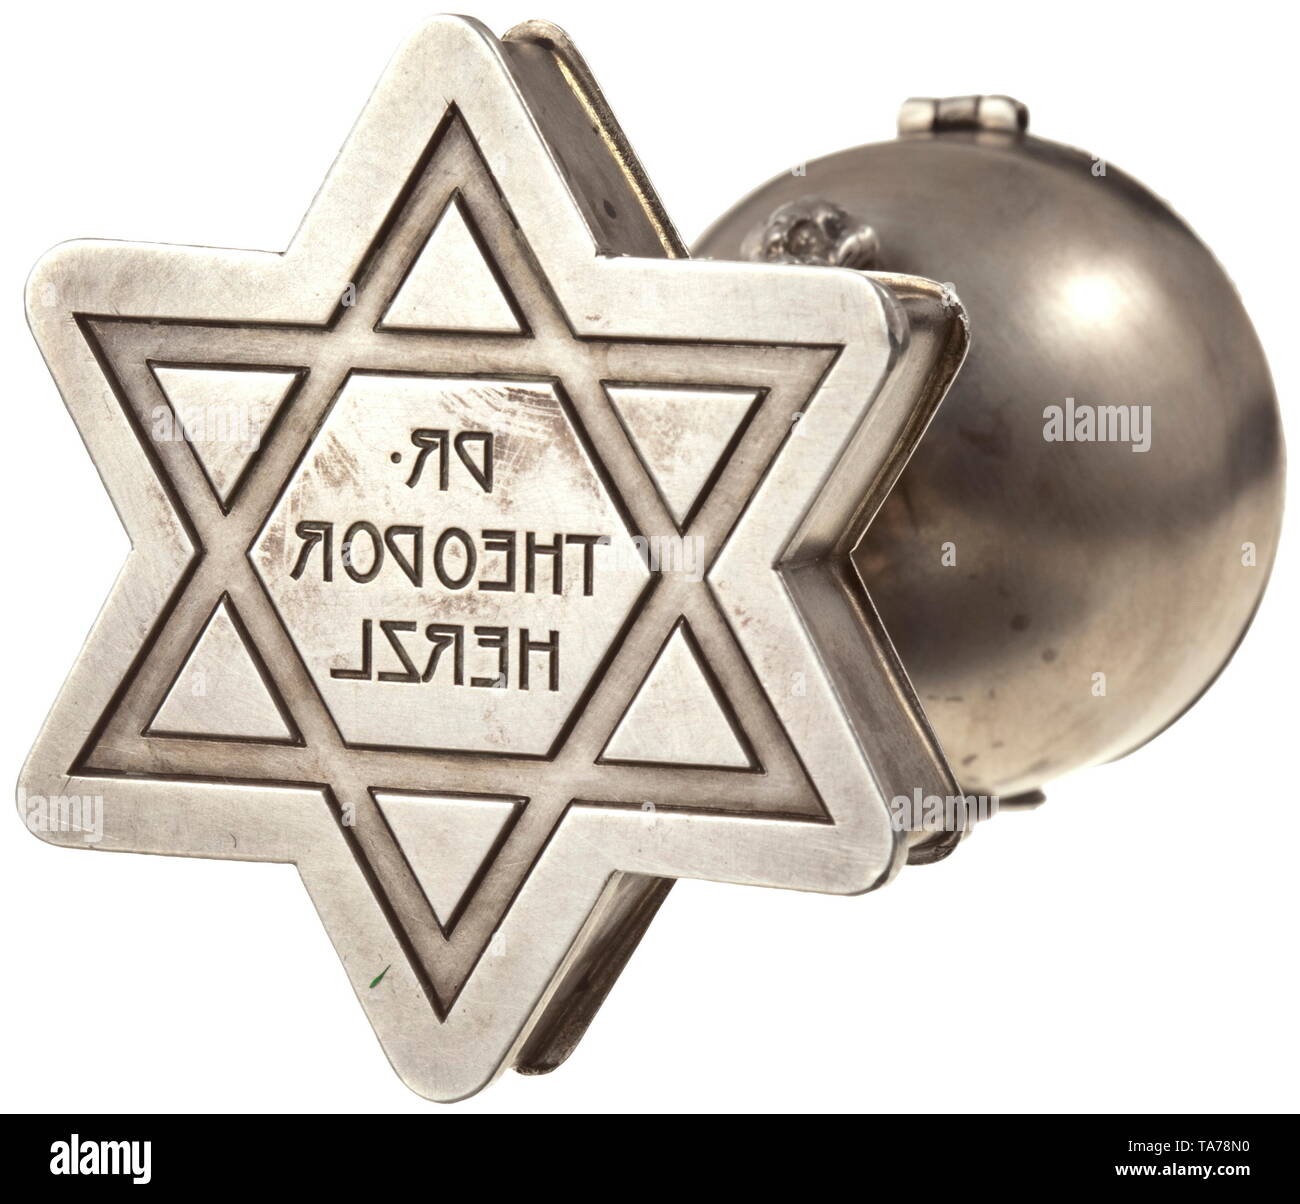 Theodor Herzl (1860 - 1904) - yarmulke, seal, table bell The yarmulke made of black silk lawn tailored in six segments, a black horn button in the top centre, trimmed wit 20th century, Additional-Rights-Clearance-Info-Not-Available Stock Photo